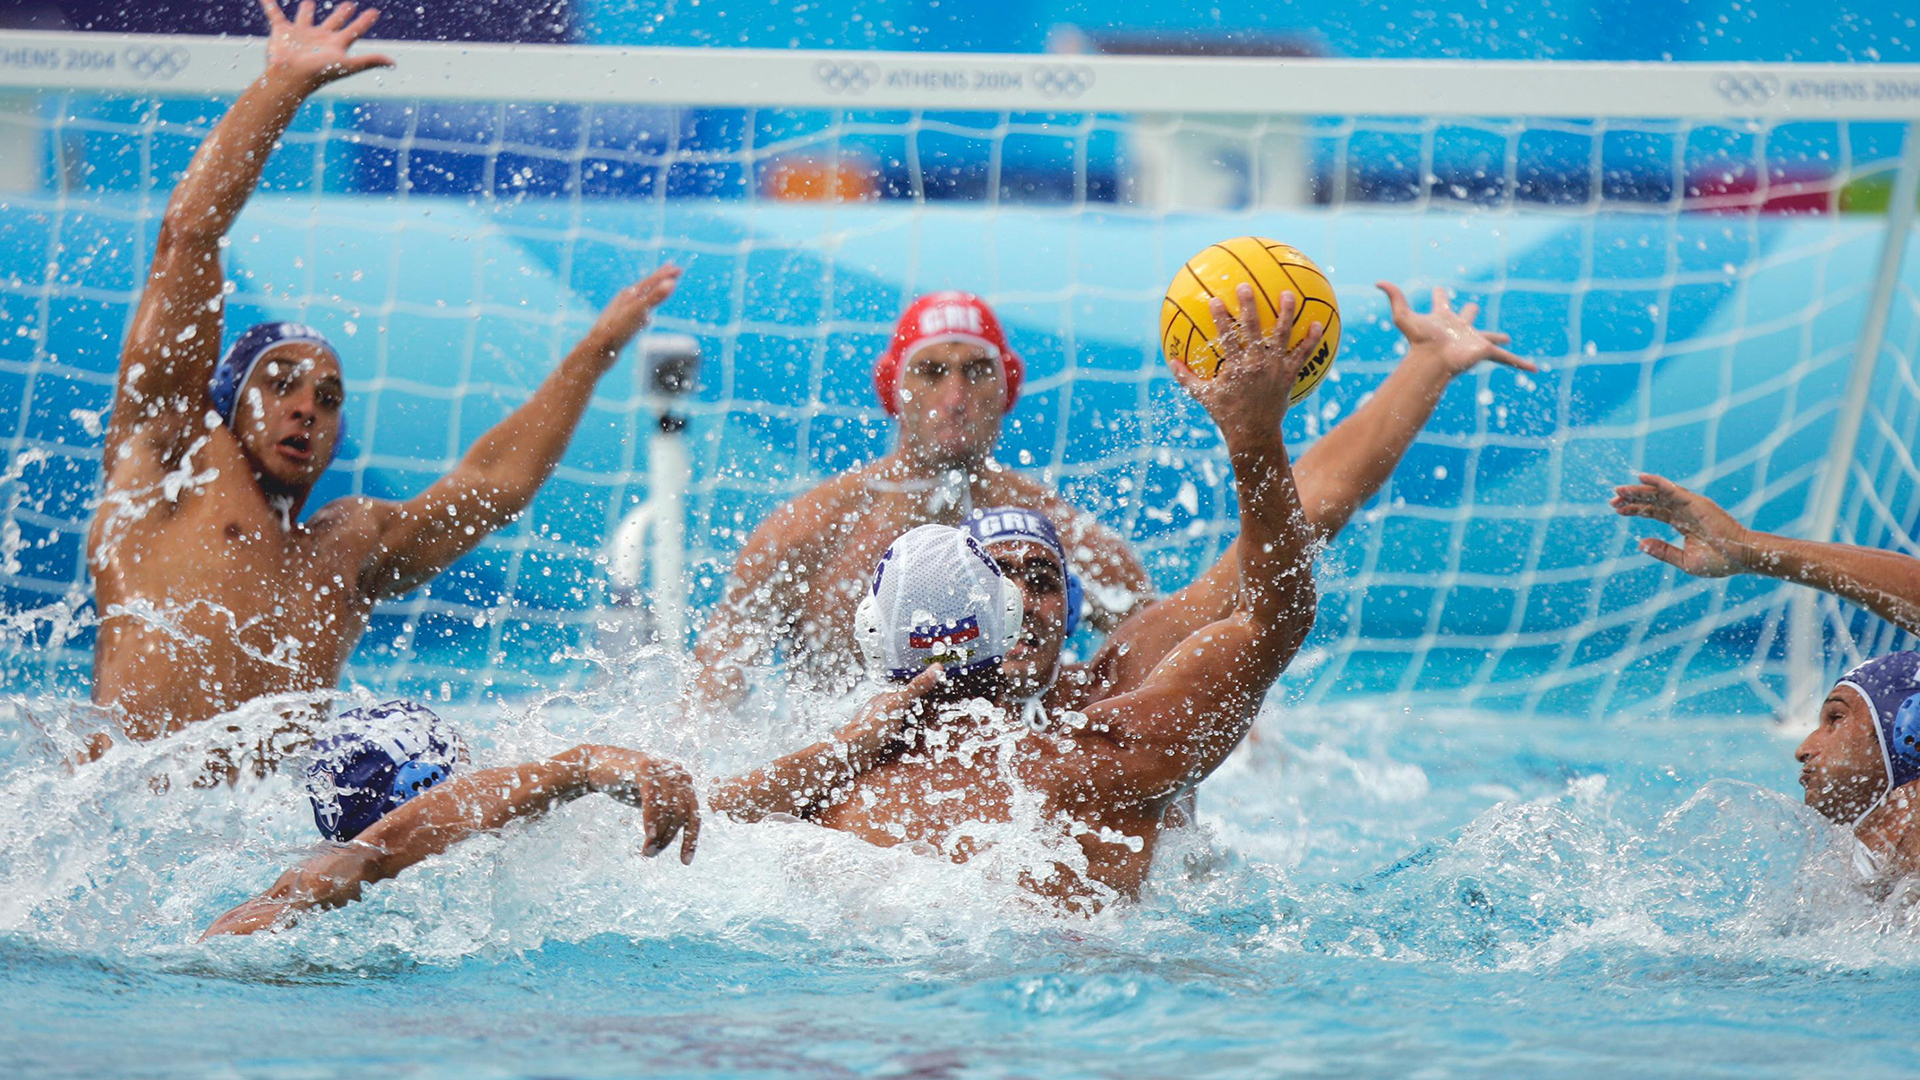 The most common injuries in water polo